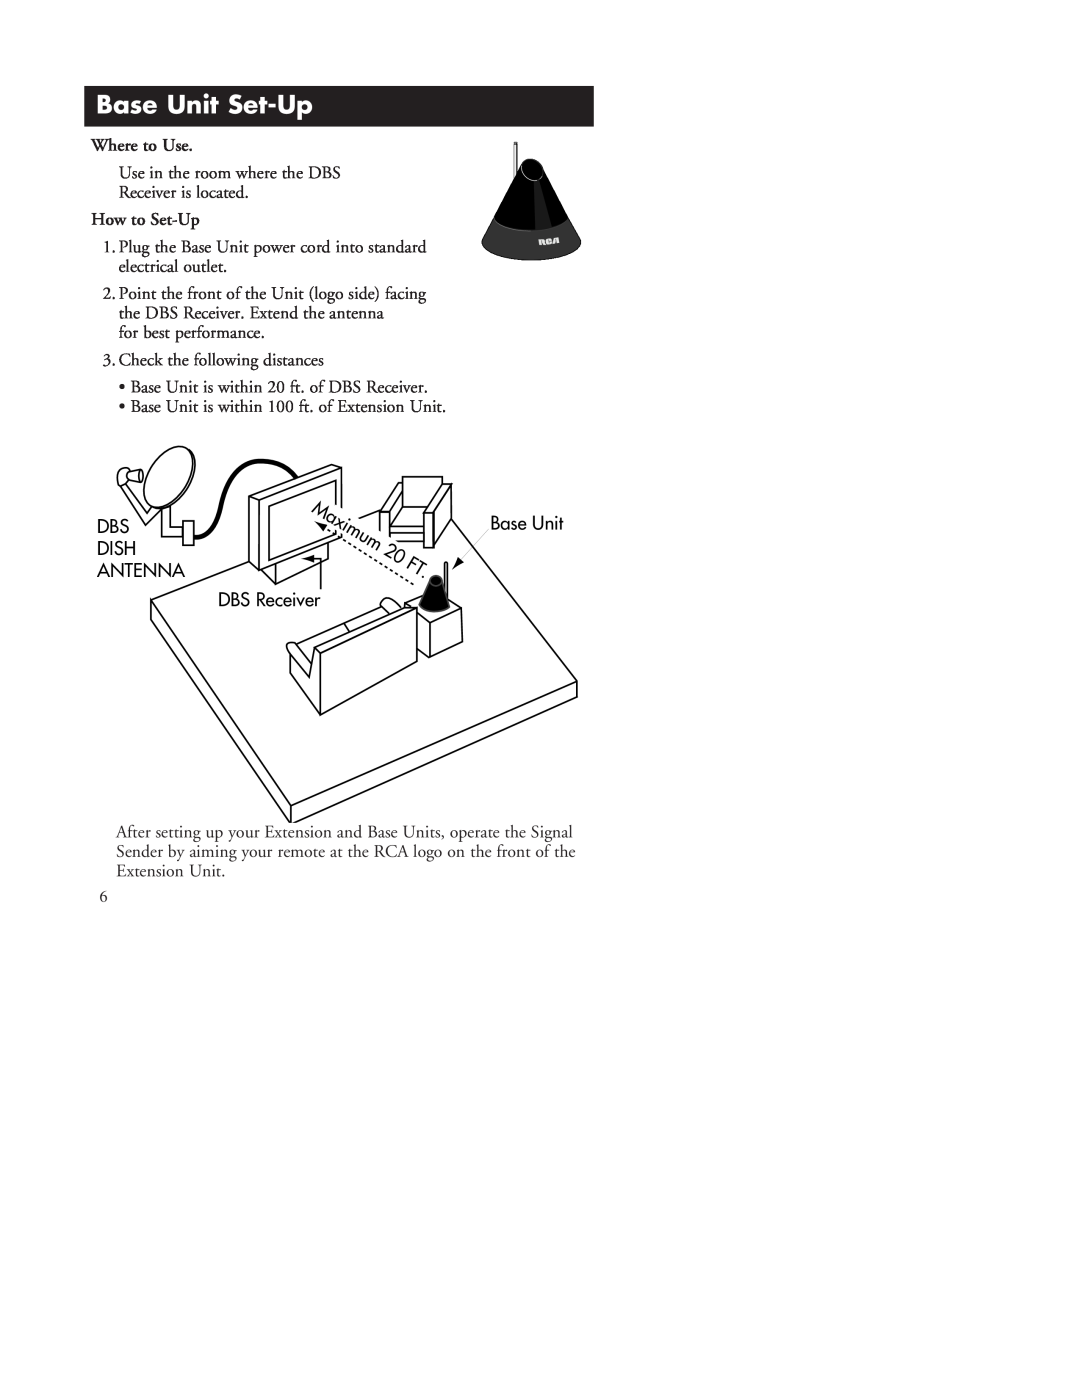 RCA D940 warranty Base Unit Set-Up, How to Set-Up, DBS DISH ANTENNA DBS Receiver, Where to Use 